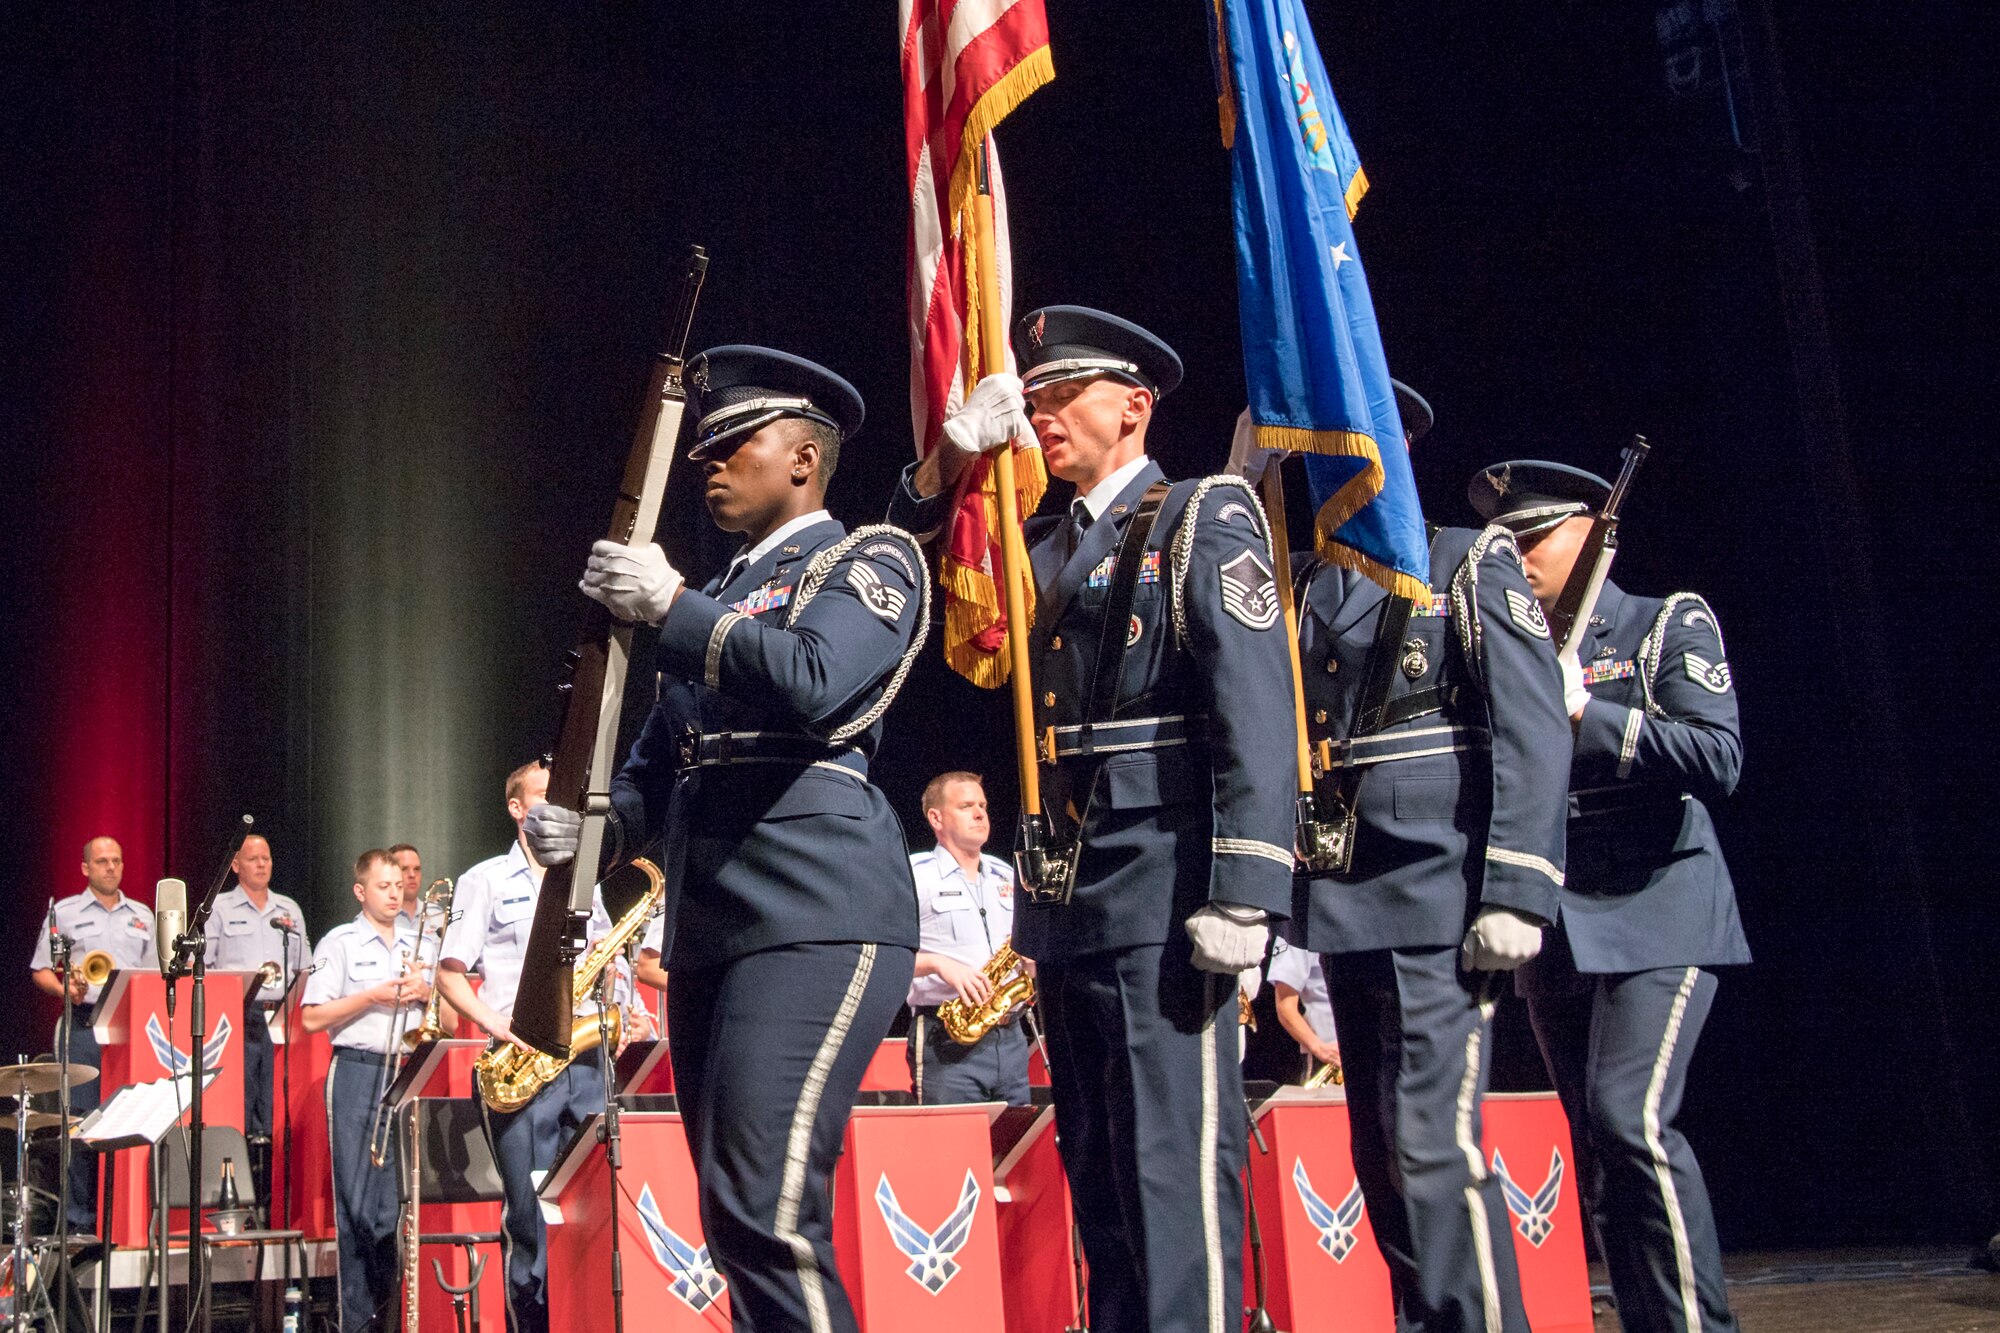 The 434th Air Refueling Wing honor guard posts the colors during a concert featuring U.S. Air Force Band of Mid-America Shades of Blue Jazz Ensemble Sept. 10, 2019 at the Honeywell Center in Wabash, Indiana. Grissom honor guard routinely performs ceremonies and funerals across the Midwest. (U.S. Air Force photo/Master Sgt. Ben Mota)